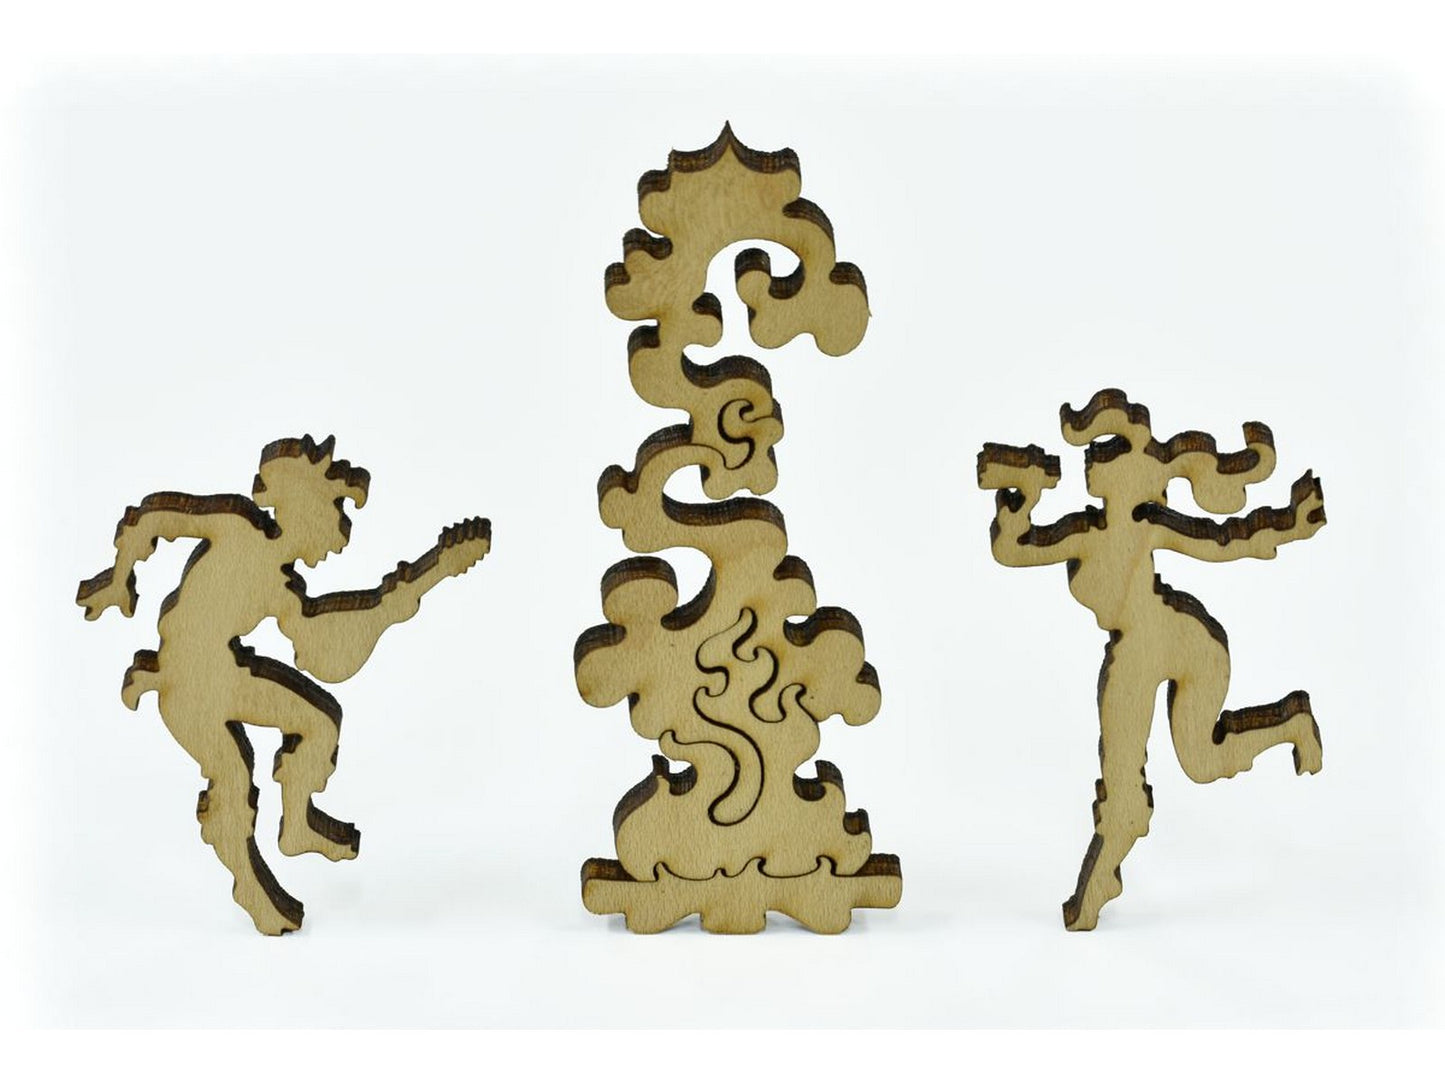 A closeup of pieces in the shape of people dancing around a campfire.